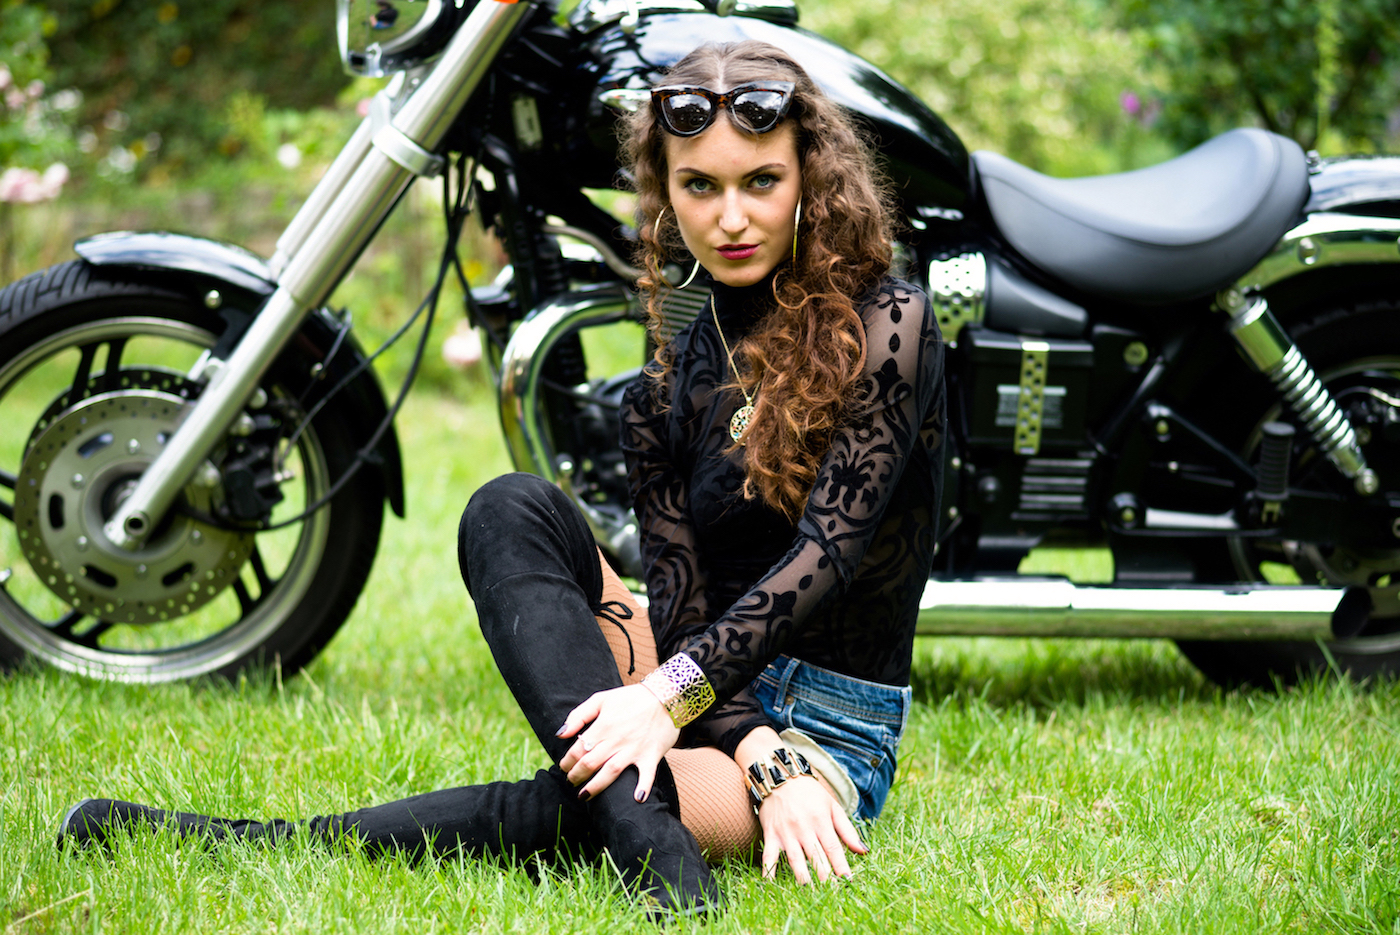 Girls with motorcycles - SAL 85/ 2.8